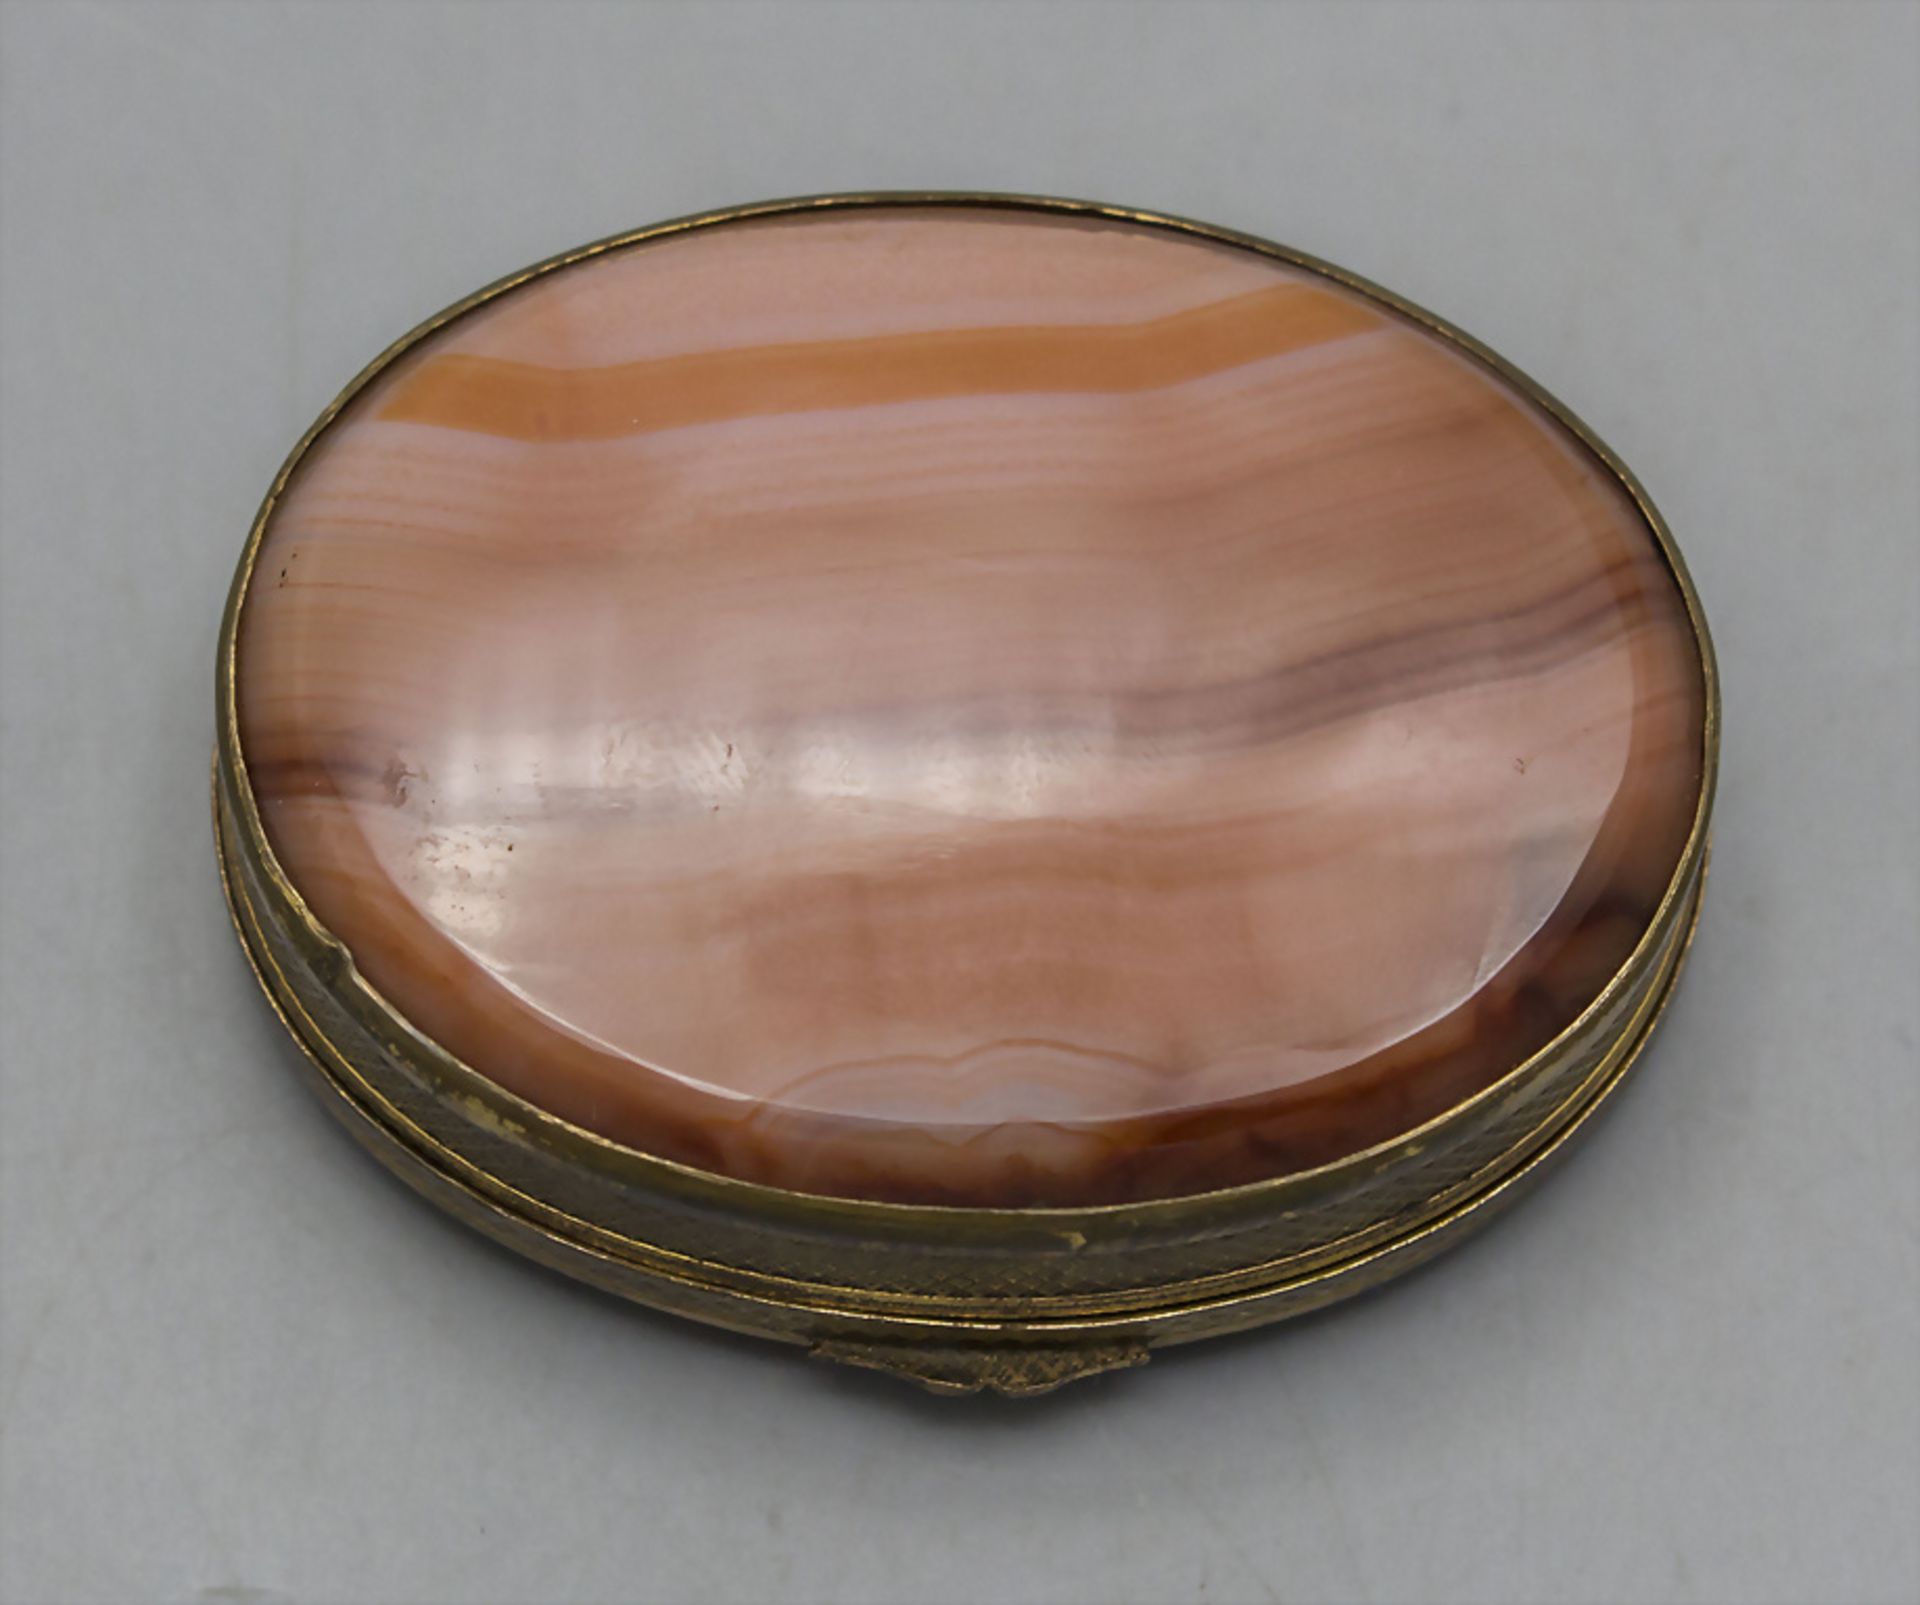 Ovale Achat Deckeldose / Tabatiere / An oval agate snuffbox, Frankreich, Ende 19. Jh. - Image 5 of 5